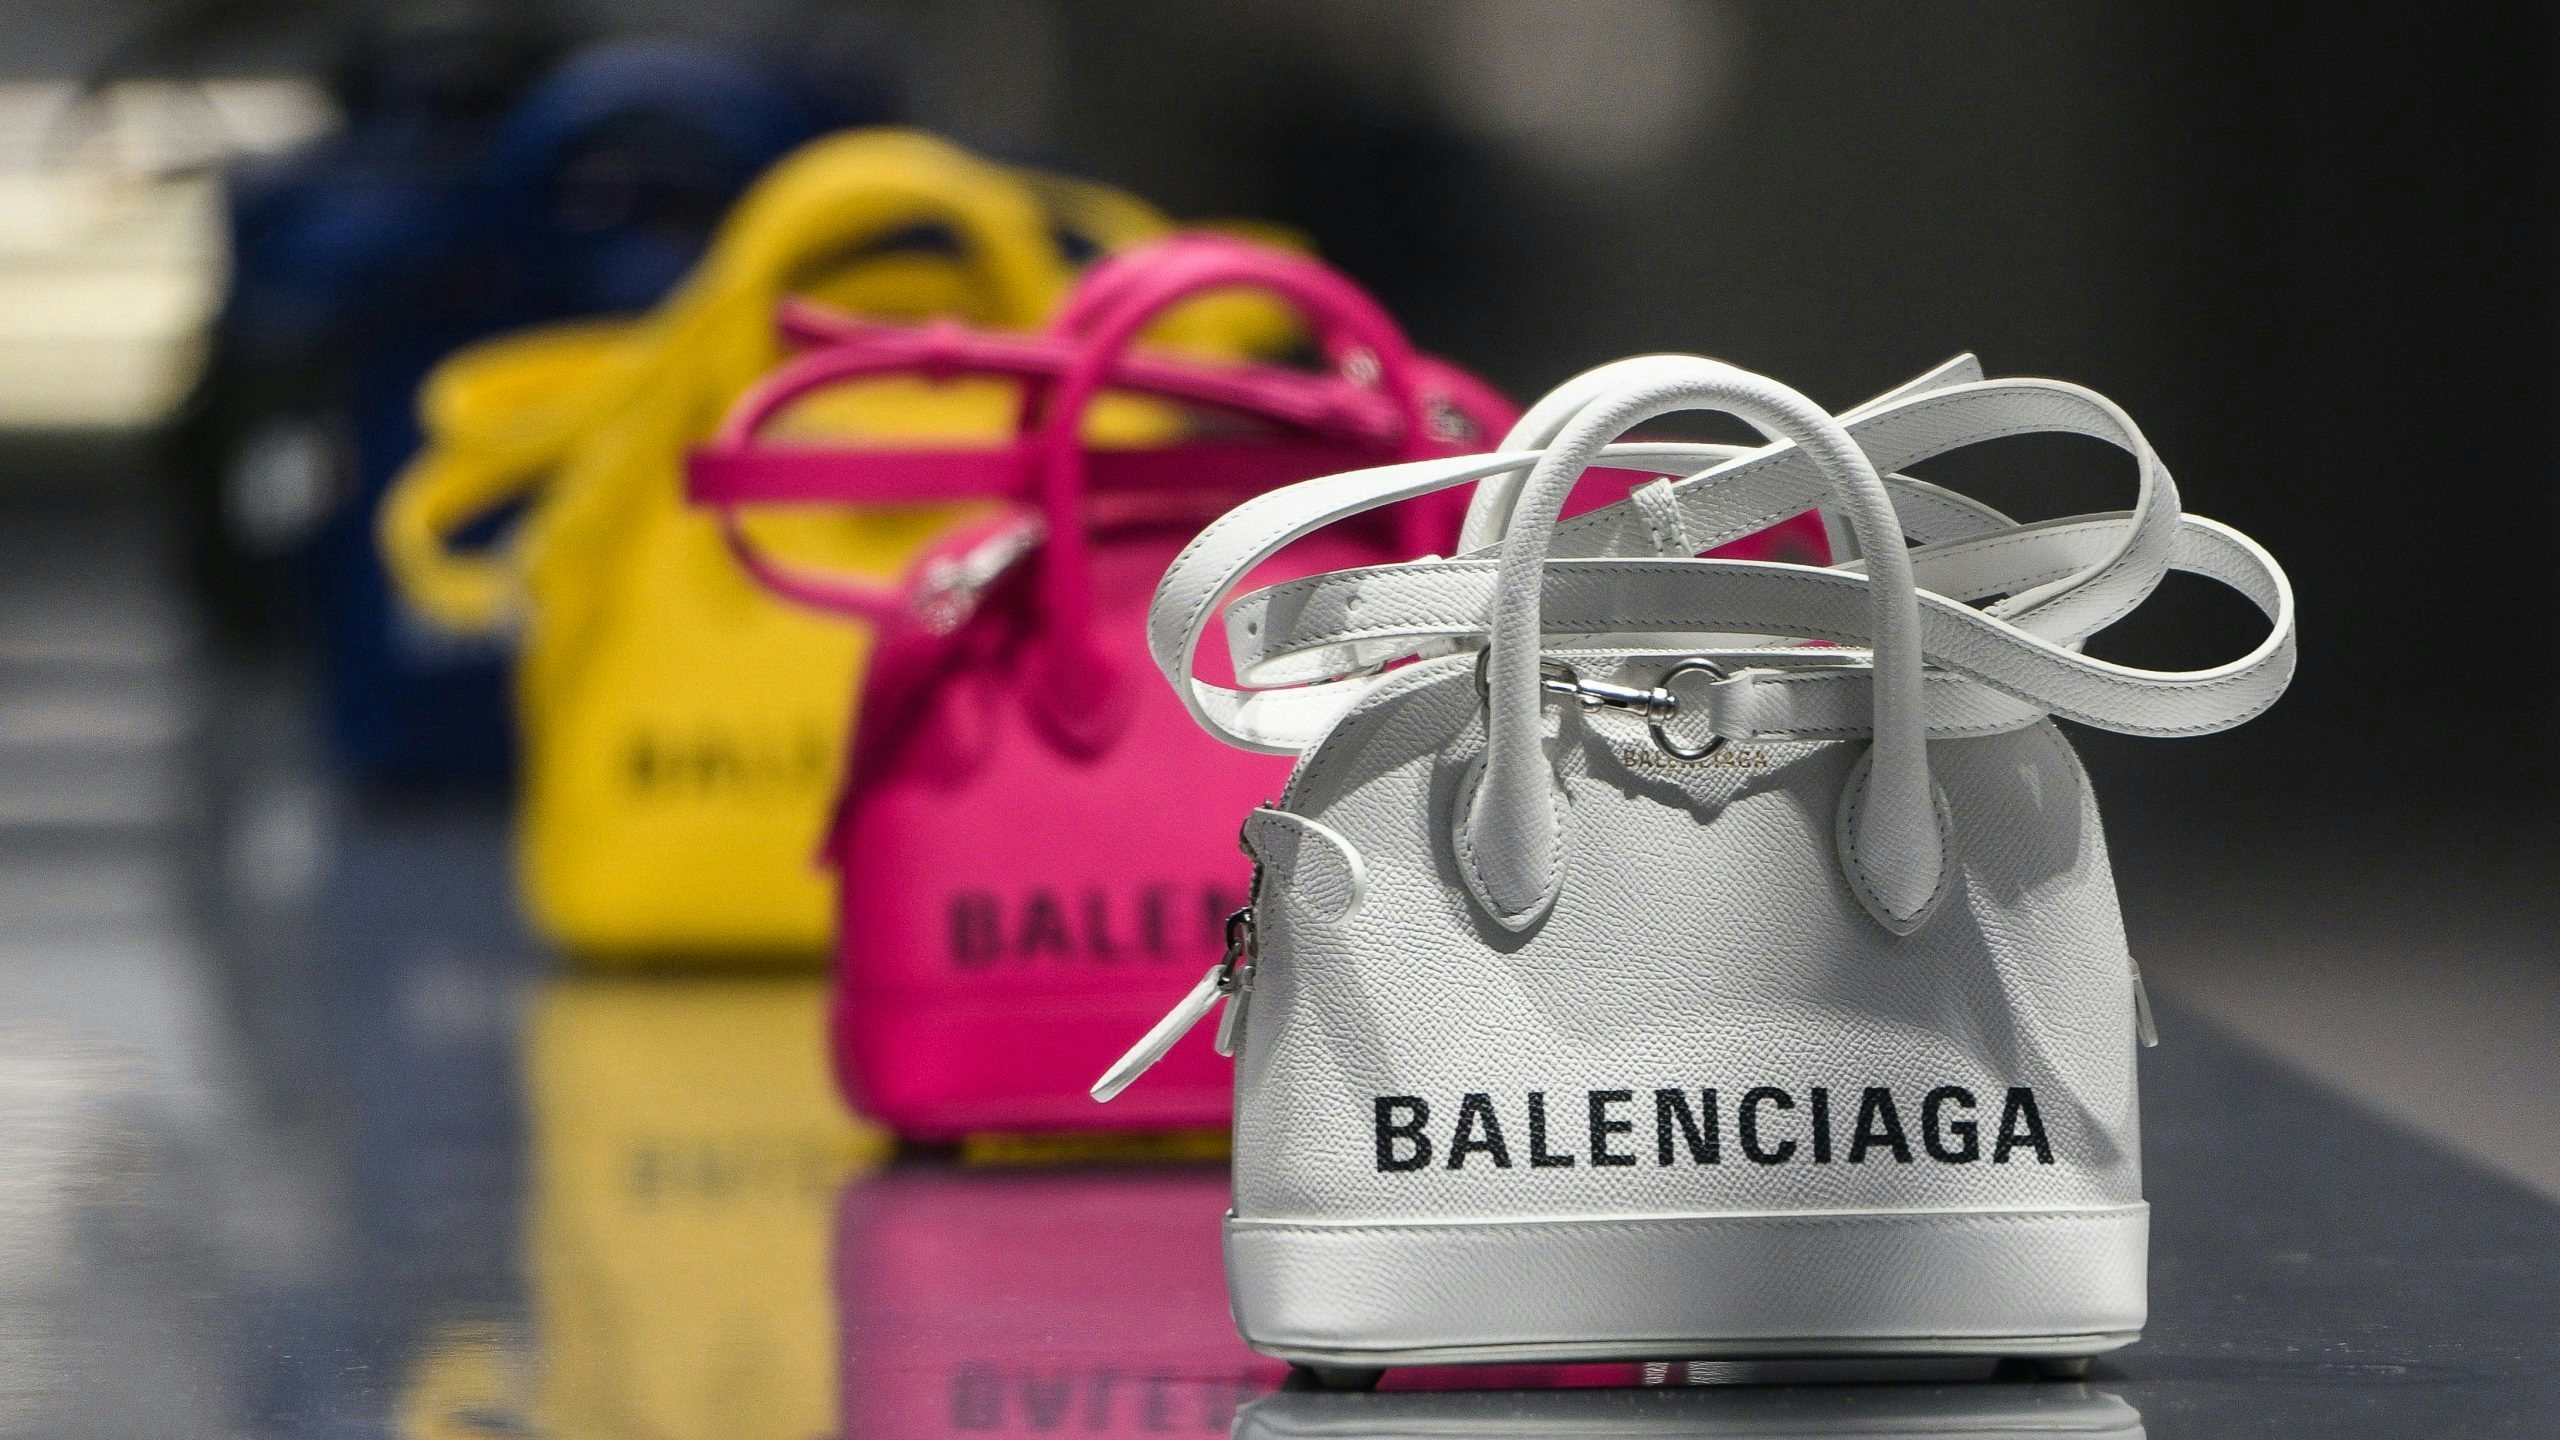 As brands continue to tap China’s e-commerce platforms, Alibaba’s Tmall signs up Balenciaga and Chloé indicating its unrelenting acquisition strategy. Photo: Shutterstock 
